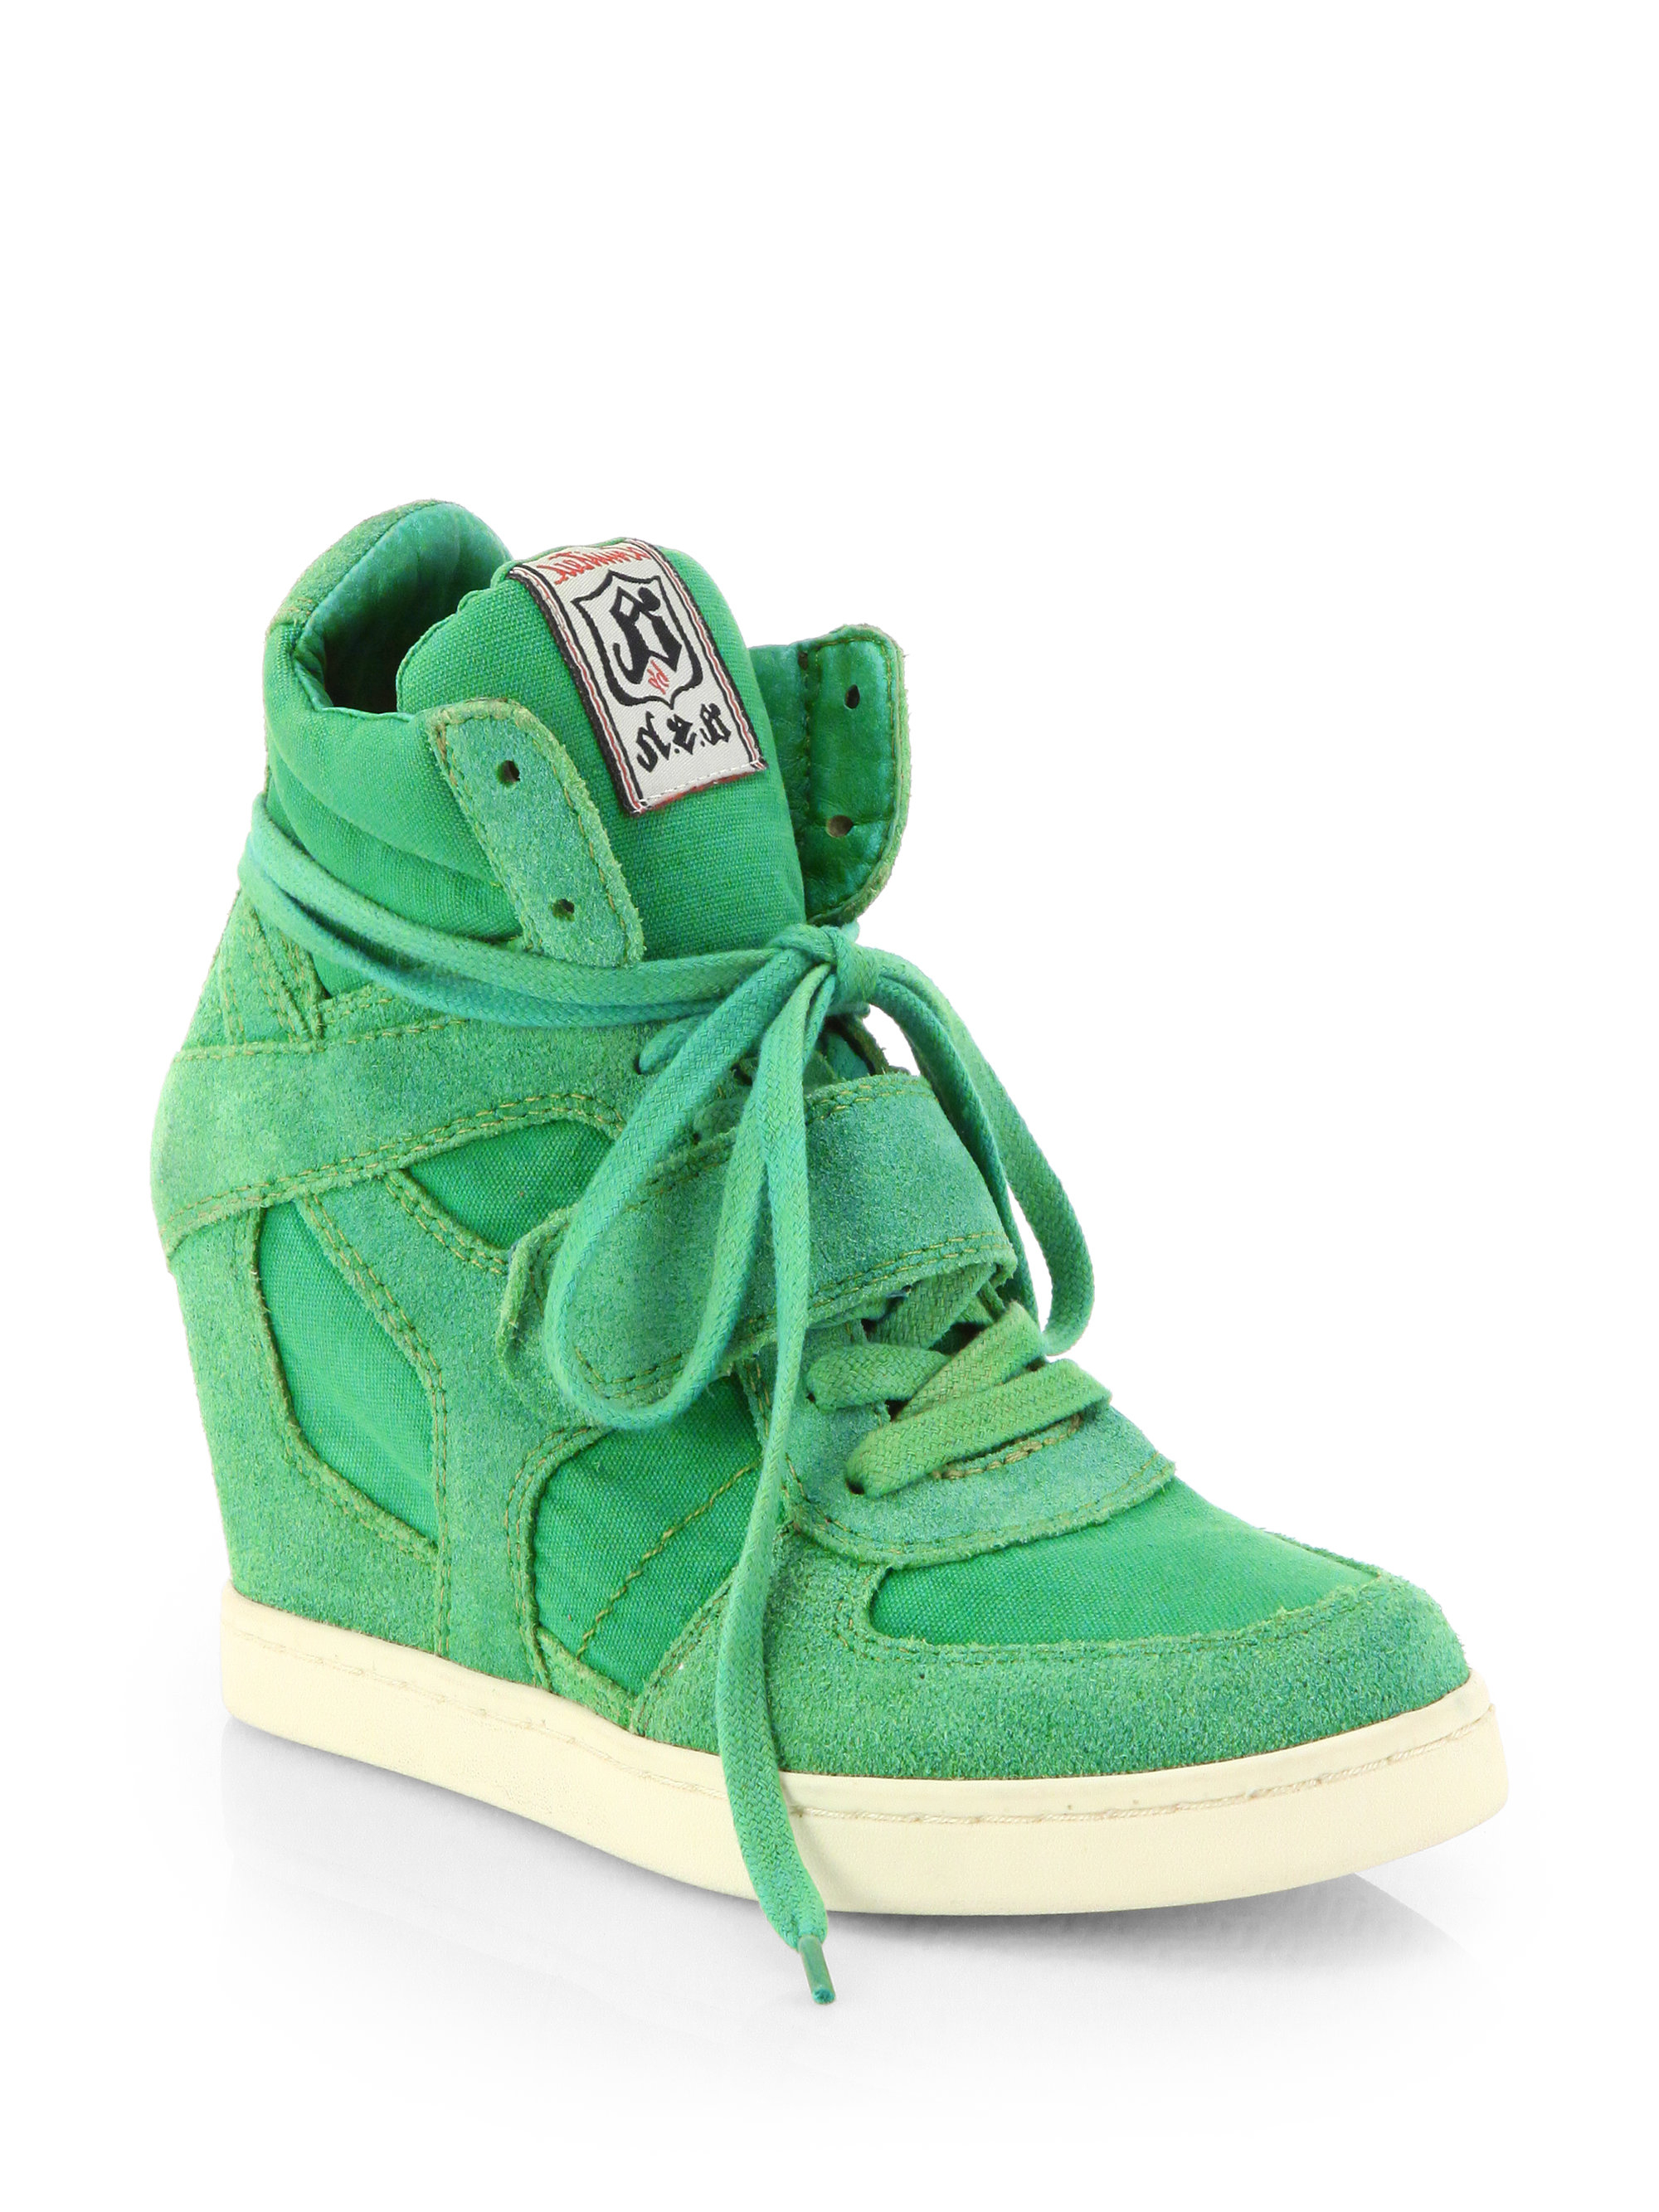 Ash Bowie Suede & Canvas Wedge Sneakers in Green (BRAZIL) | Lyst